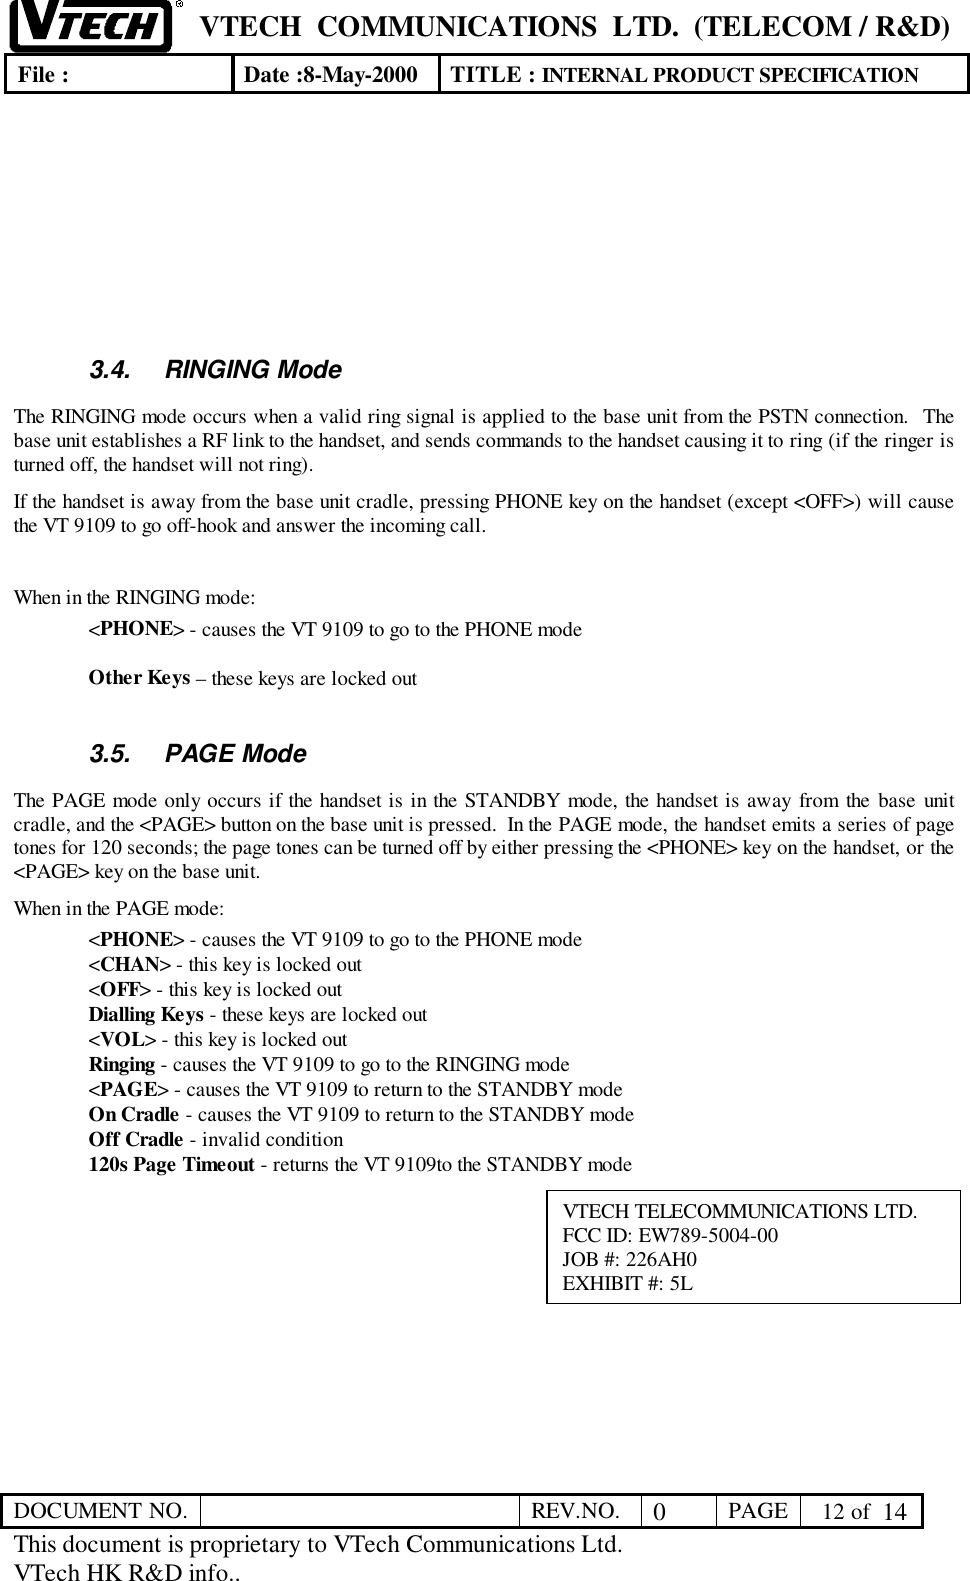 VTECH  COMMUNICATIONS  LTD.  (TELECOM / R&amp;D)File : Date :8-May-2000 TITLE : INTERNAL PRODUCT SPECIFICATIONDOCUMENT NO. REV.NO. 0PAGE  12 of  14This document is proprietary to VTech Communications Ltd.VTech HK R&amp;D info..3.4. RINGING ModeThe RINGING mode occurs when a valid ring signal is applied to the base unit from the PSTN connection.  Thebase unit establishes a RF link to the handset, and sends commands to the handset causing it to ring (if the ringer isturned off, the handset will not ring).If the handset is away from the base unit cradle, pressing PHONE key on the handset (except &lt;OFF&gt;) will causethe VT 9109 to go off-hook and answer the incoming call.When in the RINGING mode:&lt;PHONE&gt; - causes the VT 9109 to go to the PHONE modeOther Keys – these keys are locked out3.5. PAGE ModeThe PAGE mode only occurs if the handset is in the STANDBY mode, the handset is away from the base unitcradle, and the &lt;PAGE&gt; button on the base unit is pressed.  In the PAGE mode, the handset emits a series of pagetones for 120 seconds; the page tones can be turned off by either pressing the &lt;PHONE&gt; key on the handset, or the&lt;PAGE&gt; key on the base unit.When in the PAGE mode:&lt;PHONE&gt; - causes the VT 9109 to go to the PHONE mode&lt;CHAN&gt; - this key is locked out&lt;OFF&gt; - this key is locked outDialling Keys - these keys are locked out&lt;VOL&gt; - this key is locked outRinging - causes the VT 9109 to go to the RINGING mode&lt;PAGE&gt; - causes the VT 9109 to return to the STANDBY modeOn Cradle - causes the VT 9109 to return to the STANDBY modeOff Cradle - invalid condition120s Page Timeout - returns the VT 9109to the STANDBY modeVTECH TELECOMMUNICATIONS LTD.FCC ID: EW789-5004-00JOB #: 226AH0EXHIBIT #: 5L